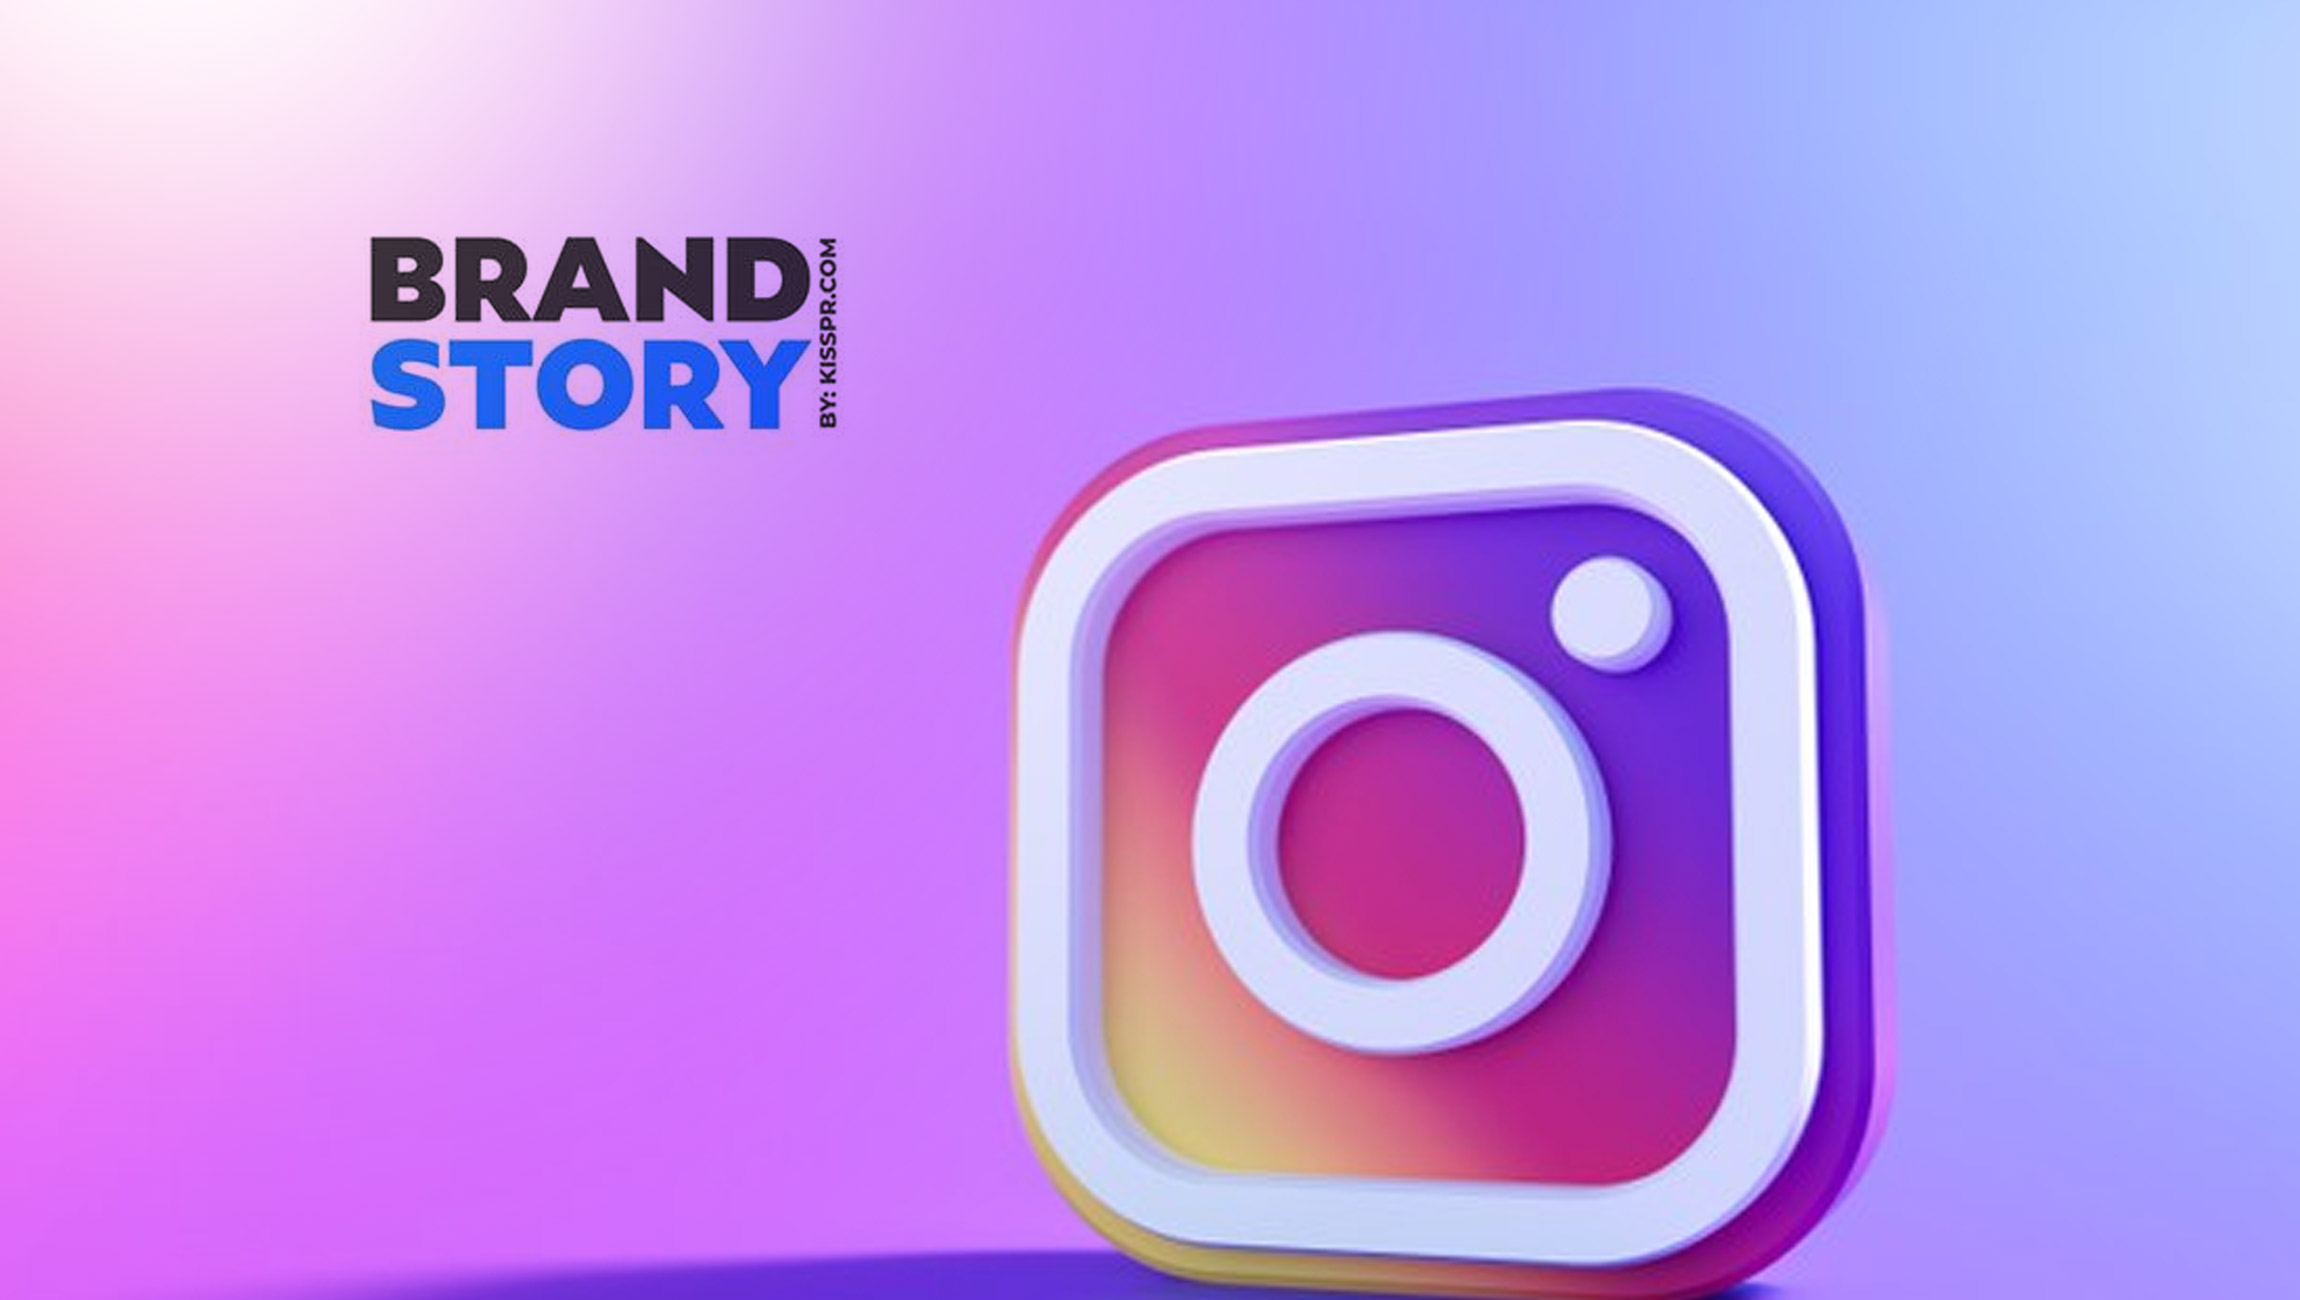 KISS PR Brand Story Releases a Resource on Instagram’s New Tools for Influencers